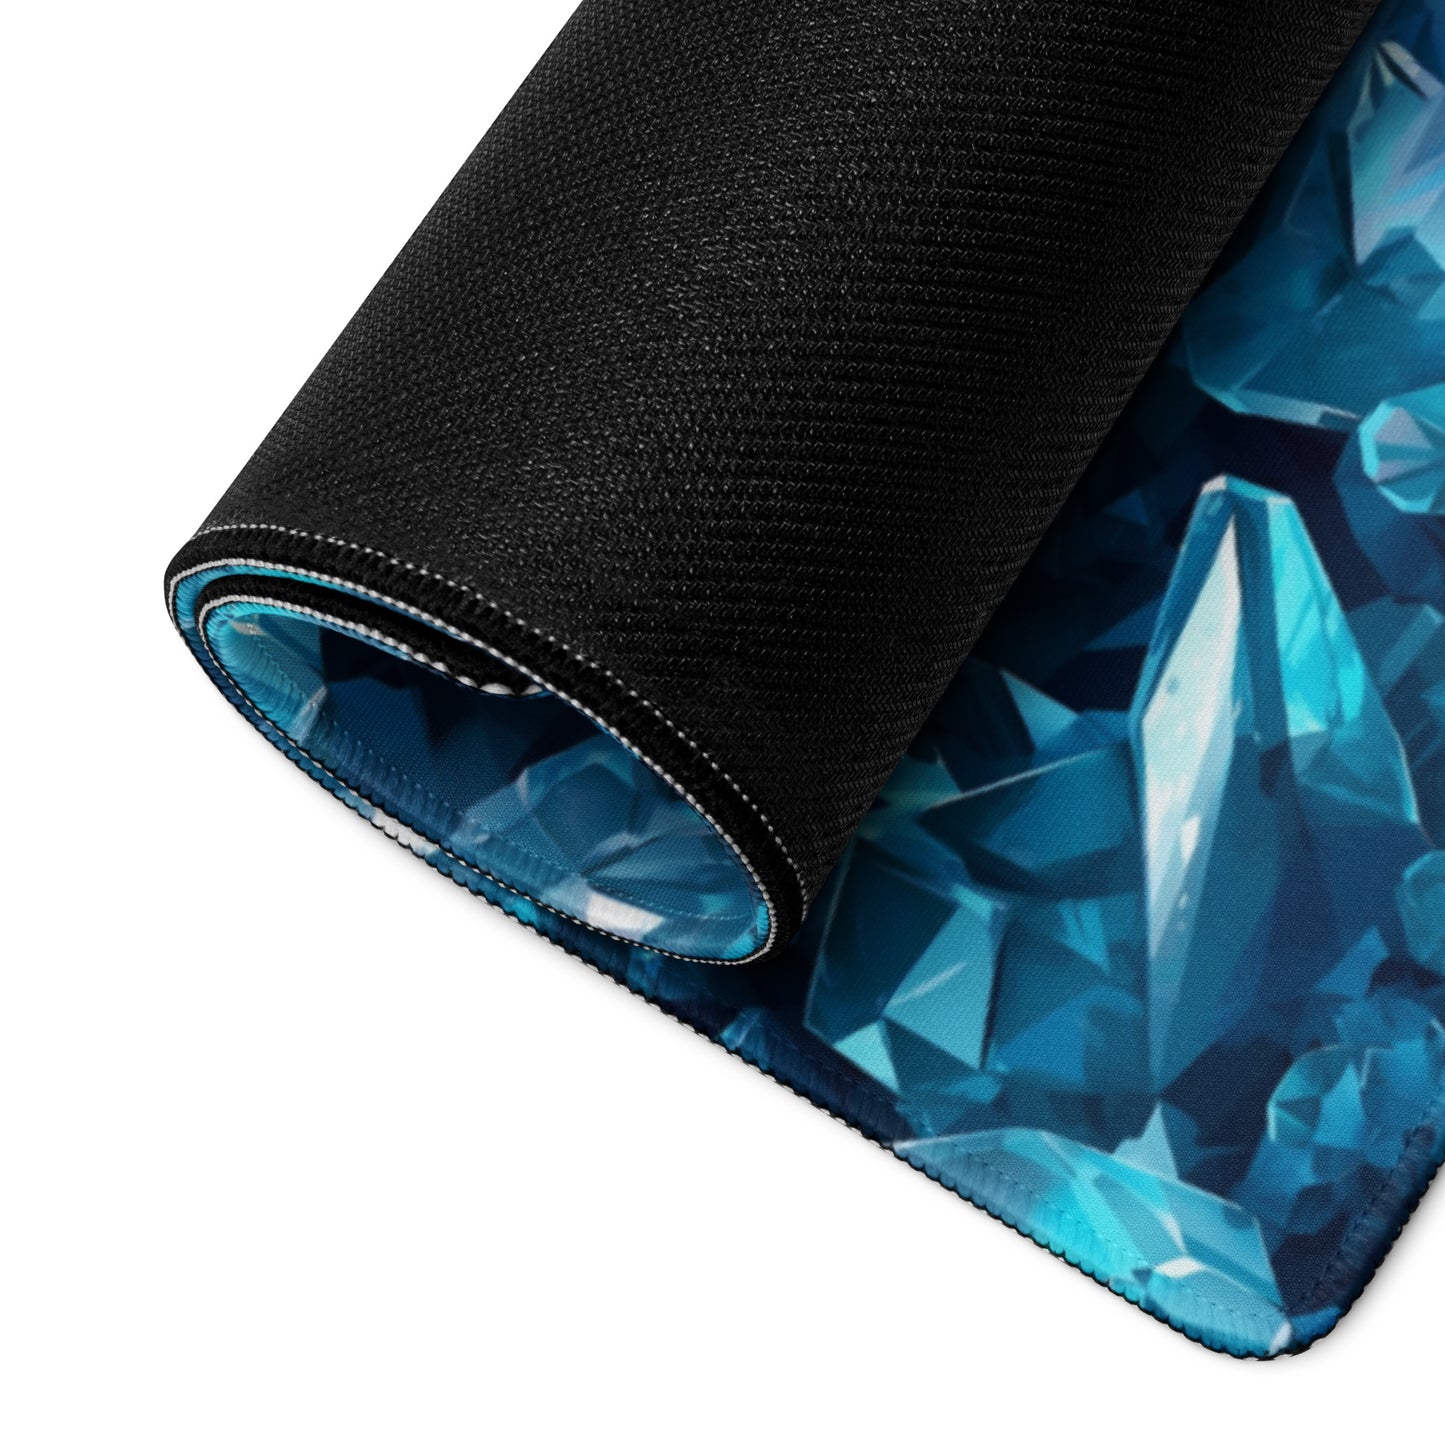 A blue crystal gaming desk pad rolled up.